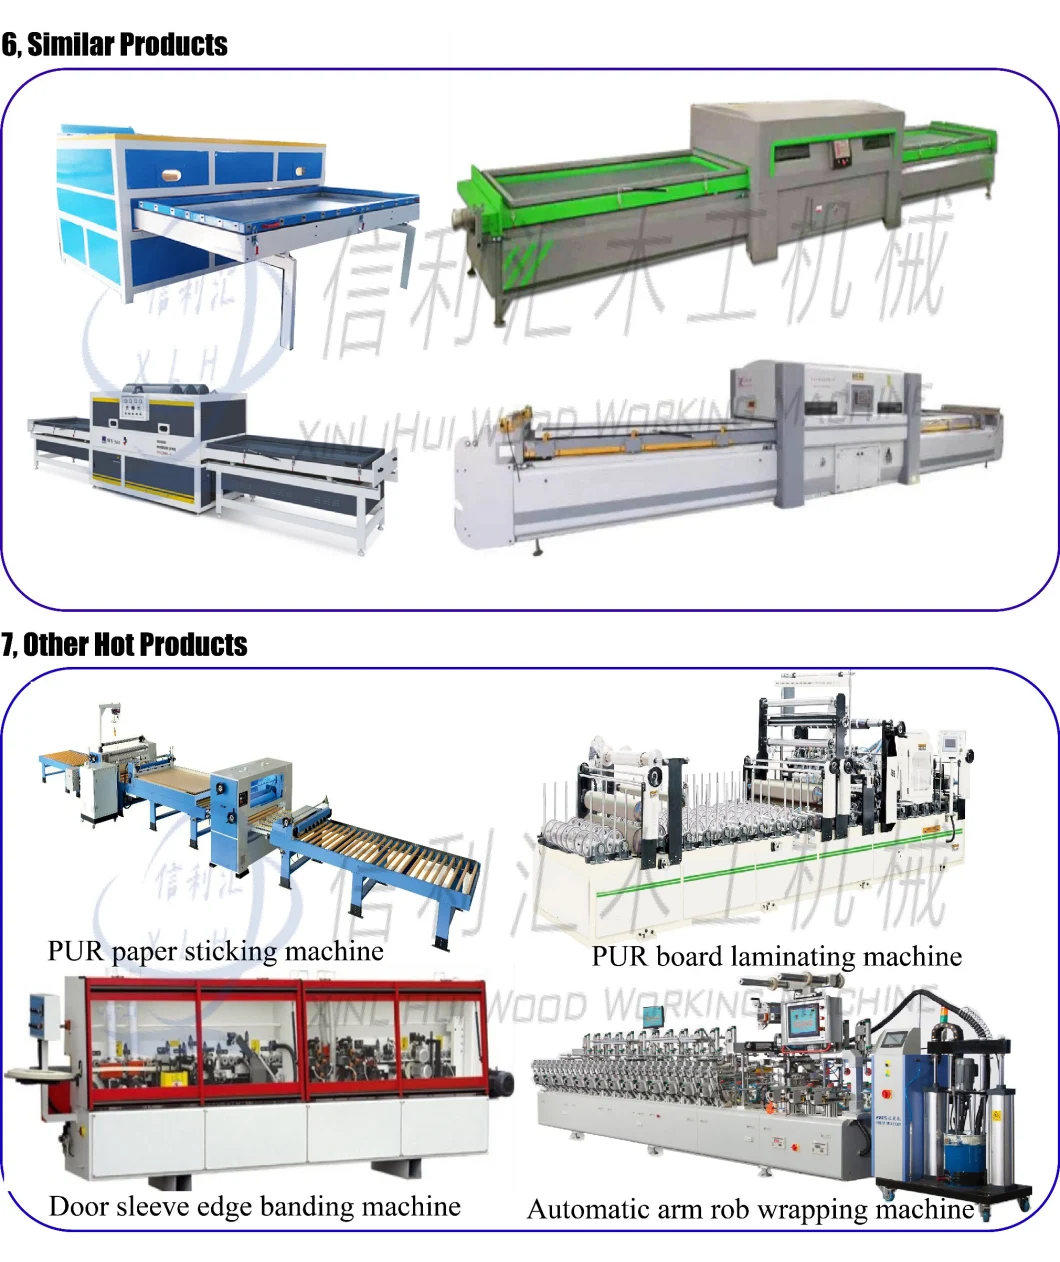 Electric Lift Table, Electric Mobile Lift Table, Electric Lift Table Electric Hydraulic Motorcycle Lifter